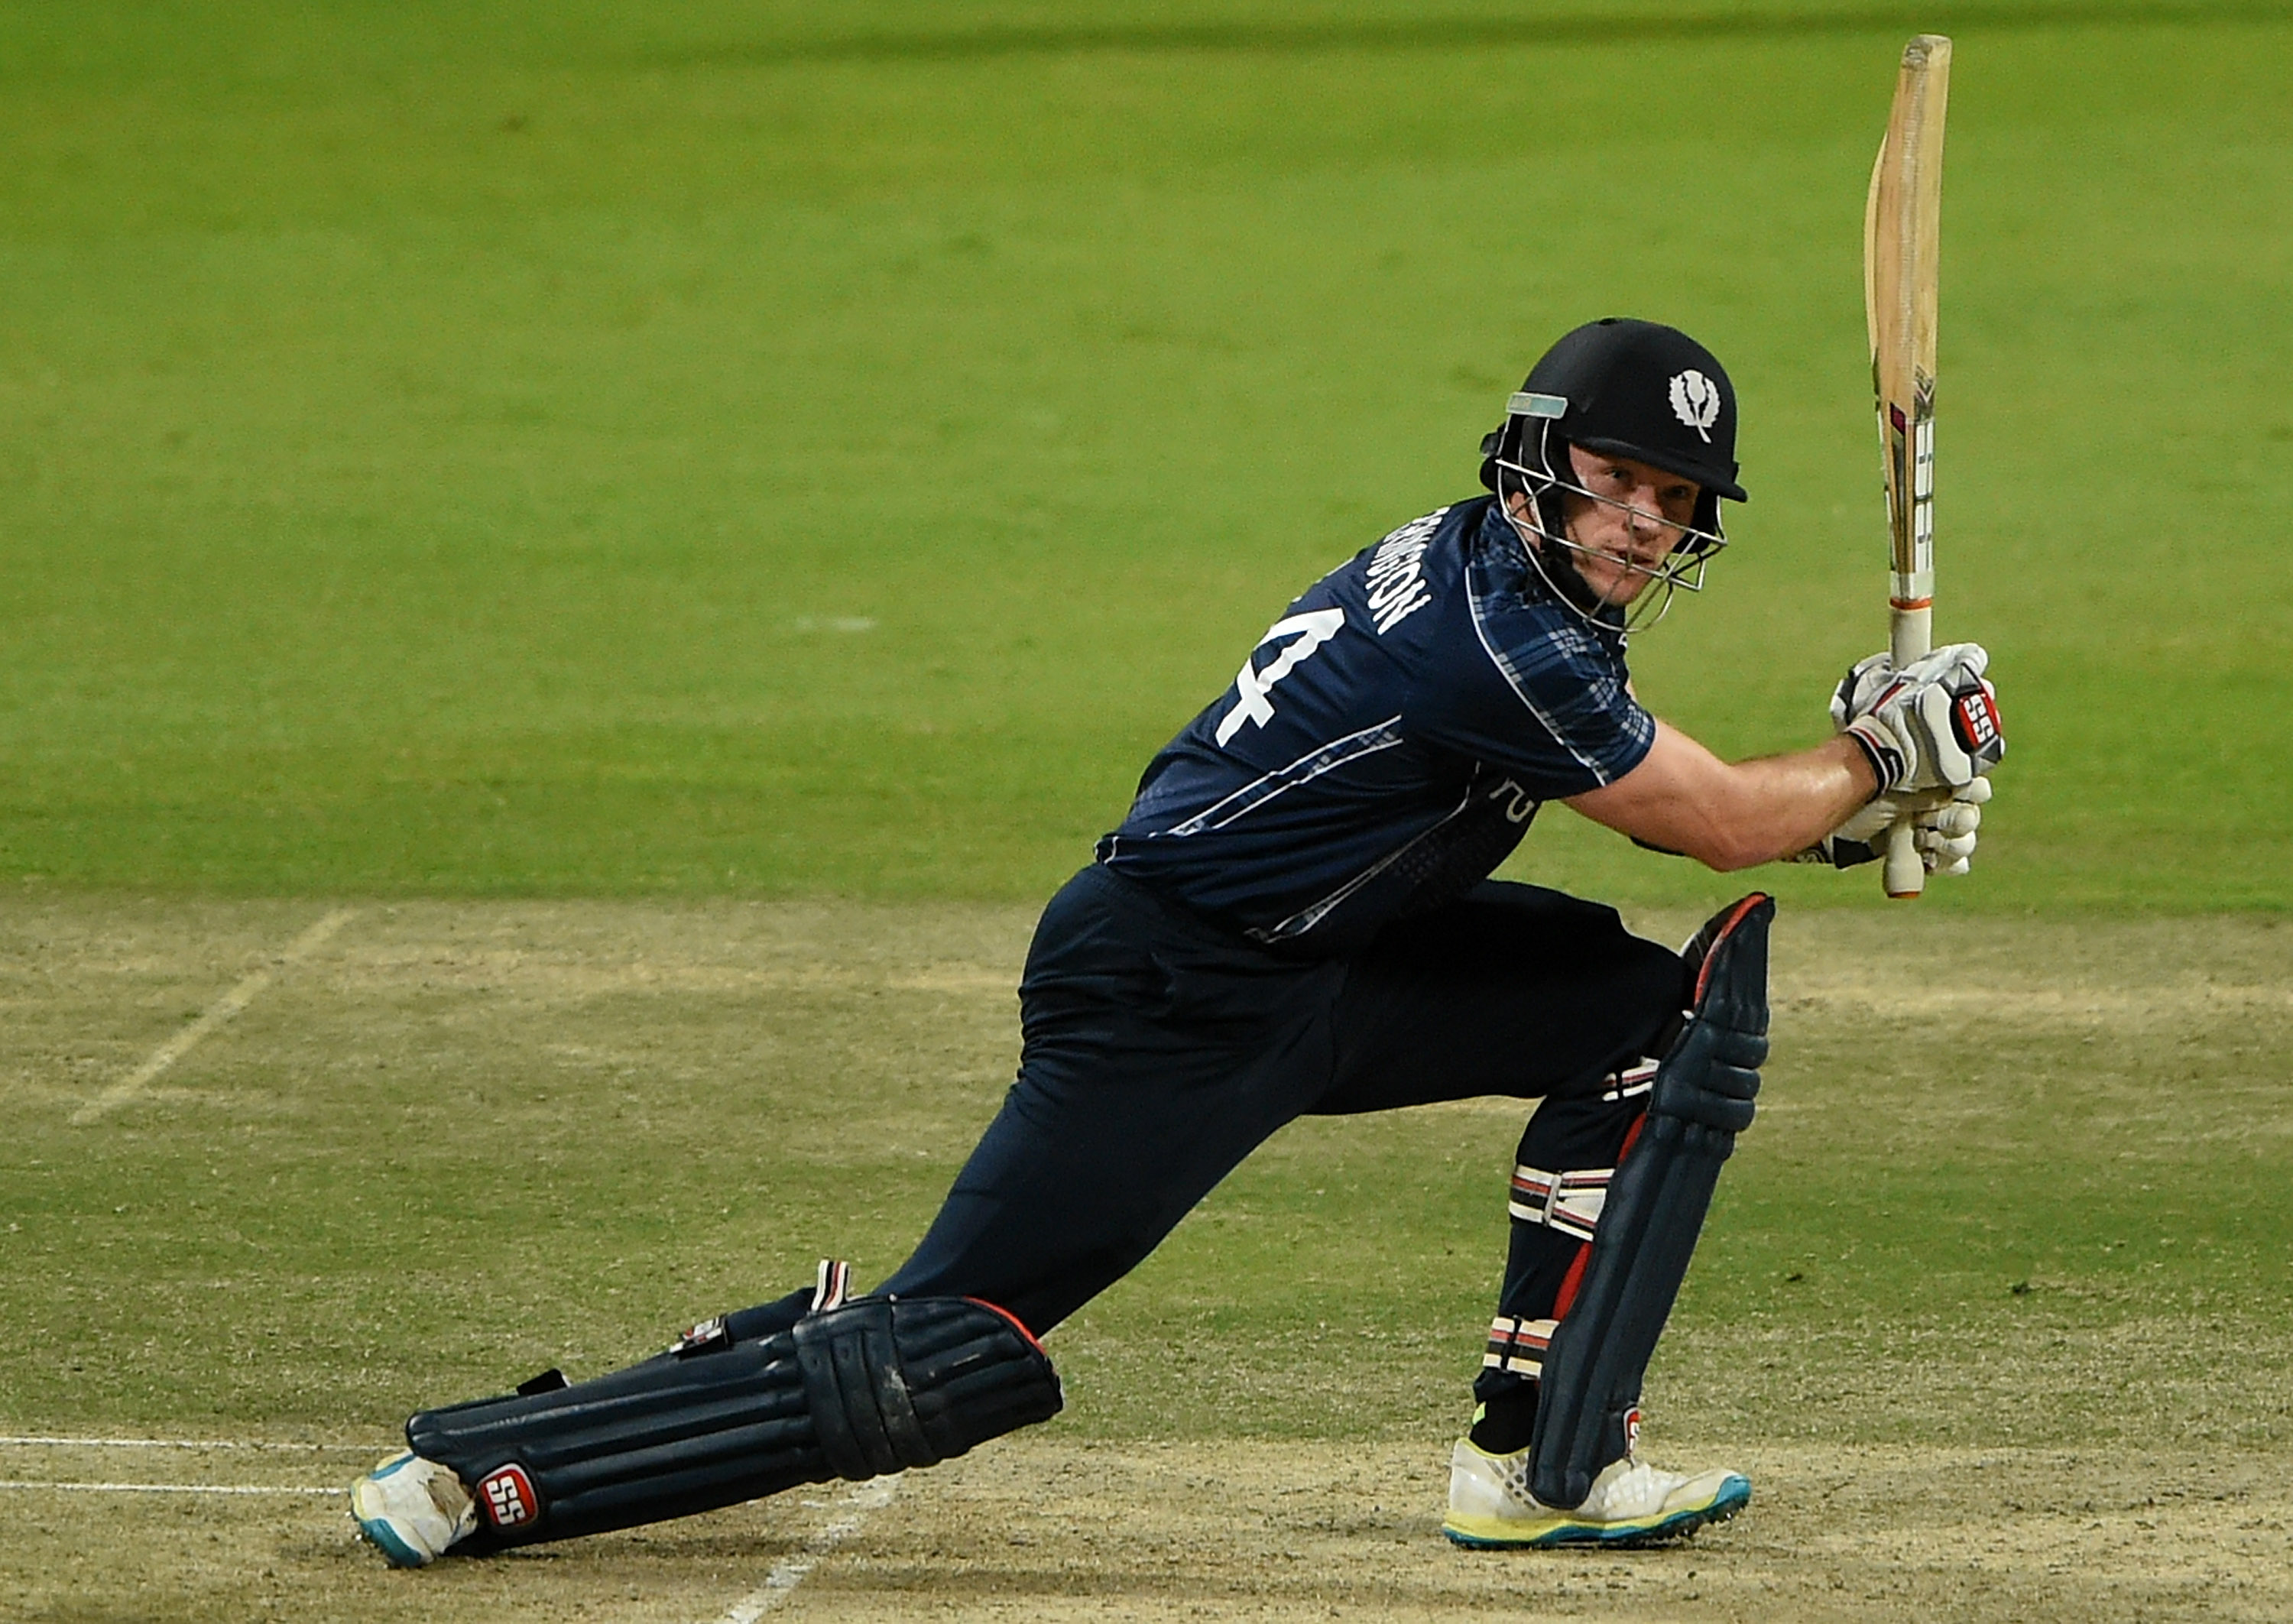 Scotland to host New Zealand for one-off ODI in June 2020